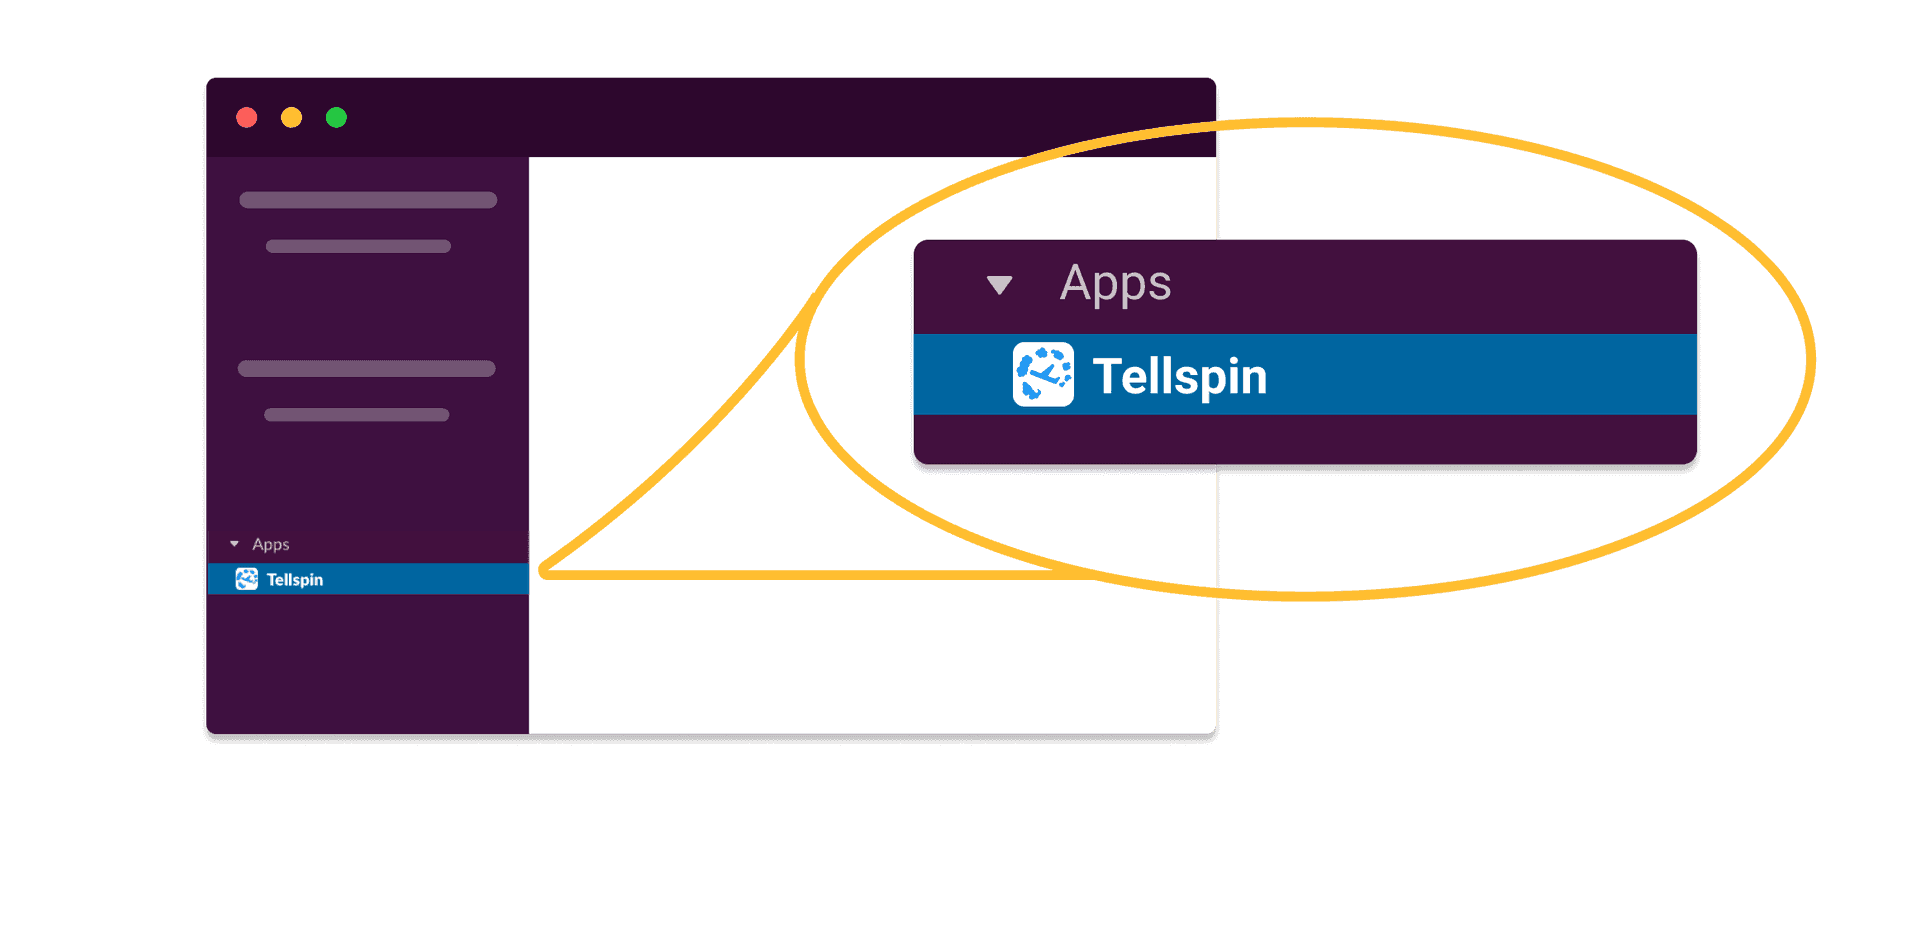 You have a message from Tellspin